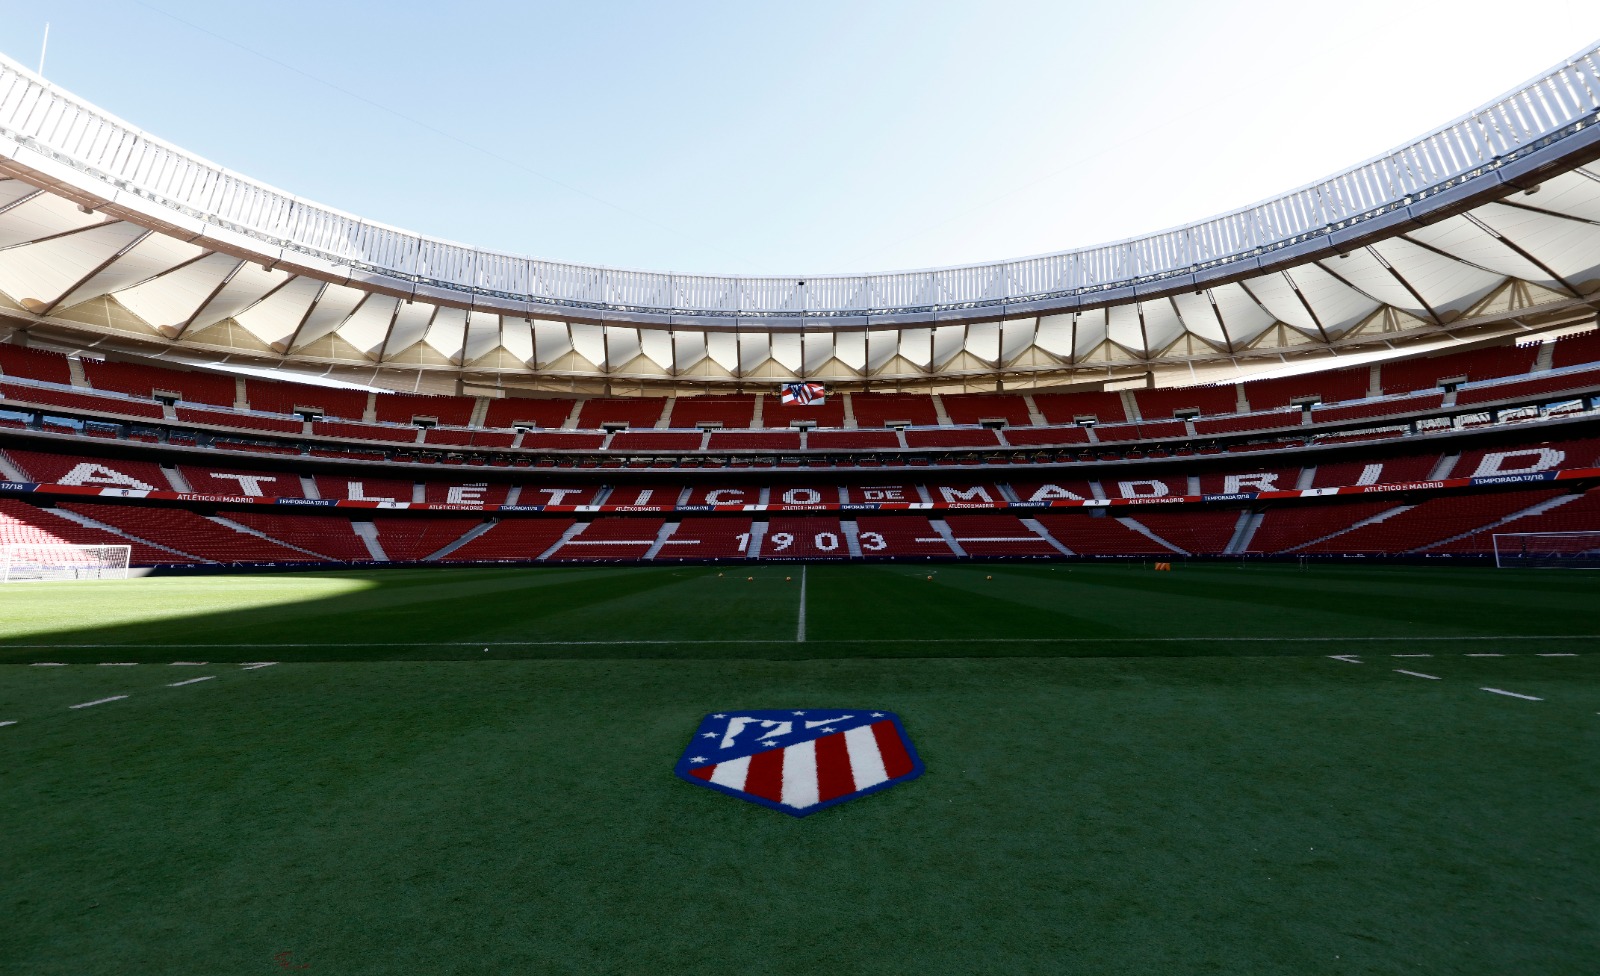 Atletico Madrid confirm that they have withdrawn from the Super League